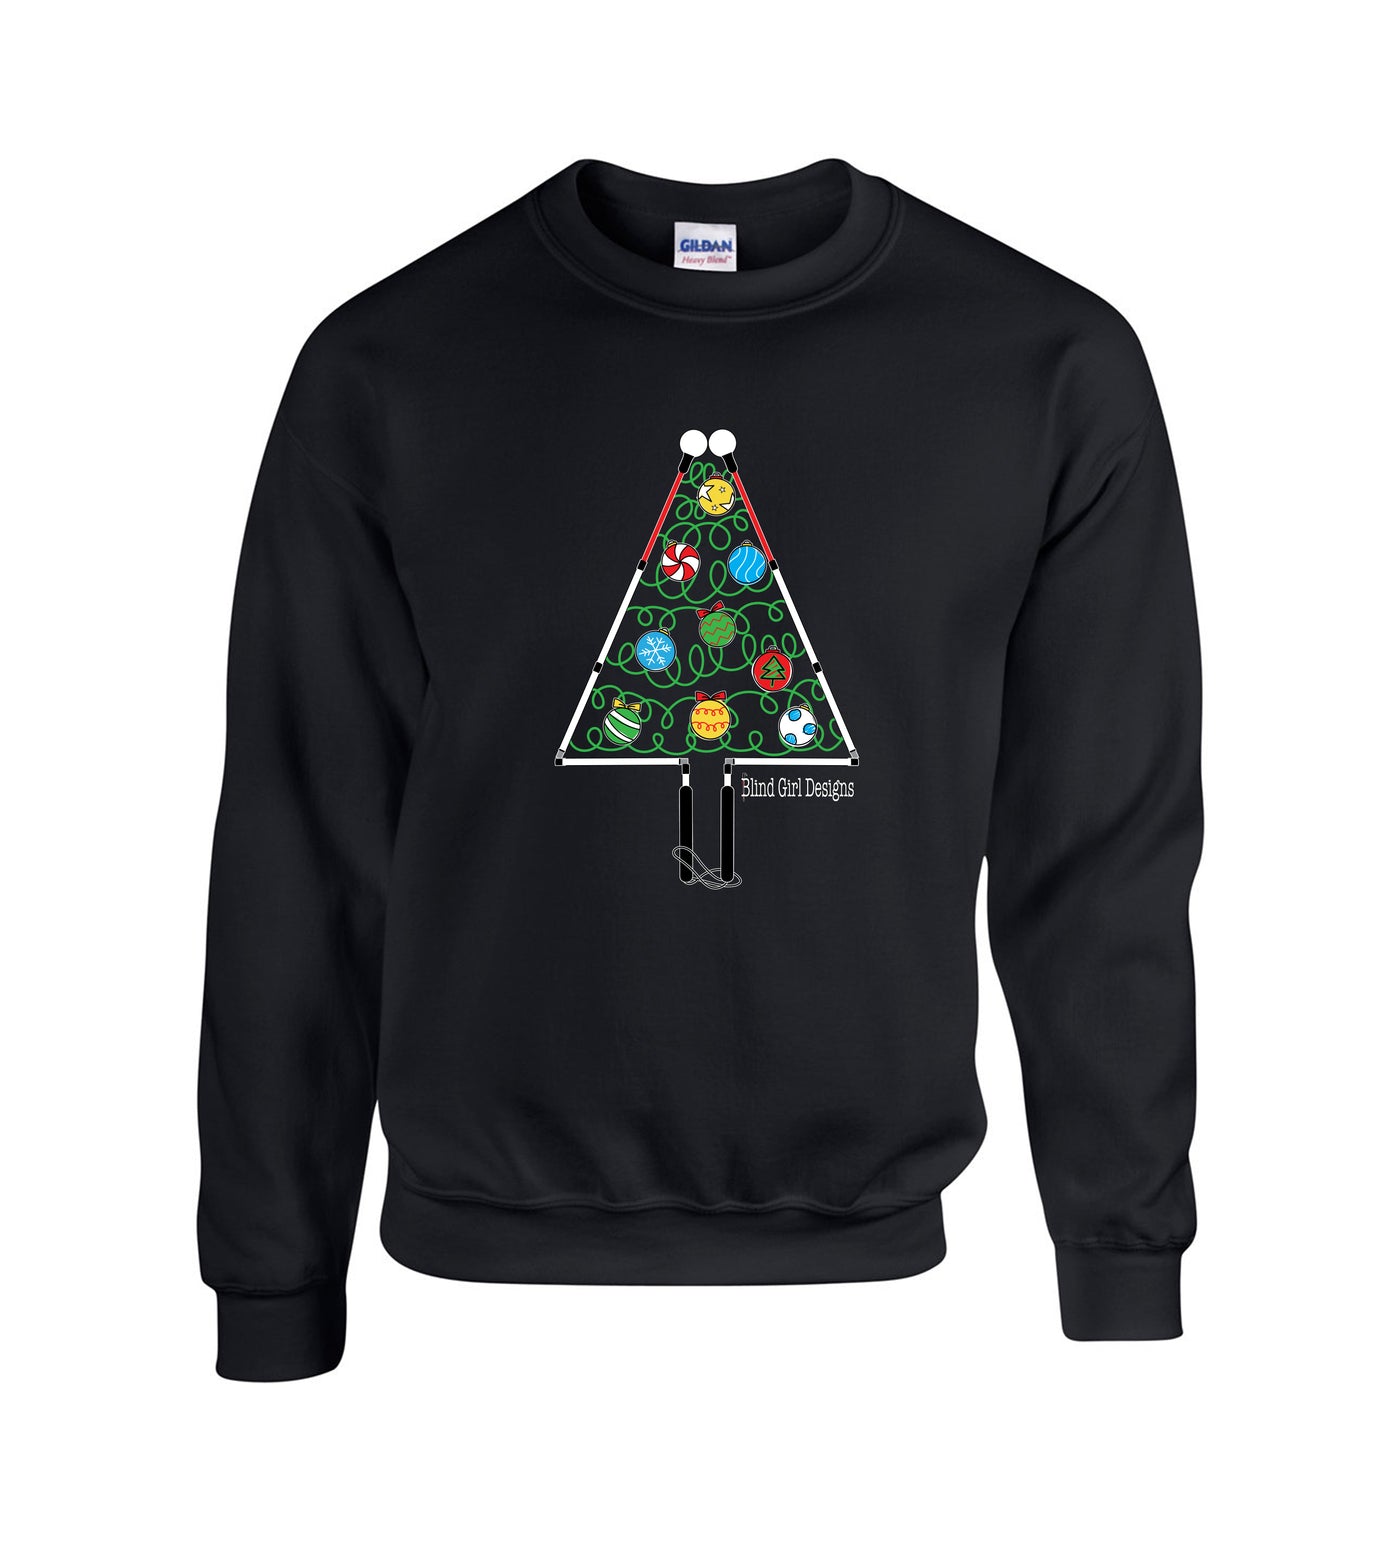 This black adult unisex sweatshirt has a large, colorful chest print of a whimsical Christmas tree outlined by two blind canes, folded at the joints to make a triangle tree shape. The black cane handles form the trunk and the roller balls form the outline of the top of the tree, instead of stars there are two roller balls! Very cute. The inside of the tree has bright  green squiggles to suggest light strands with 8 colorful round ornaments, each individually decorated.